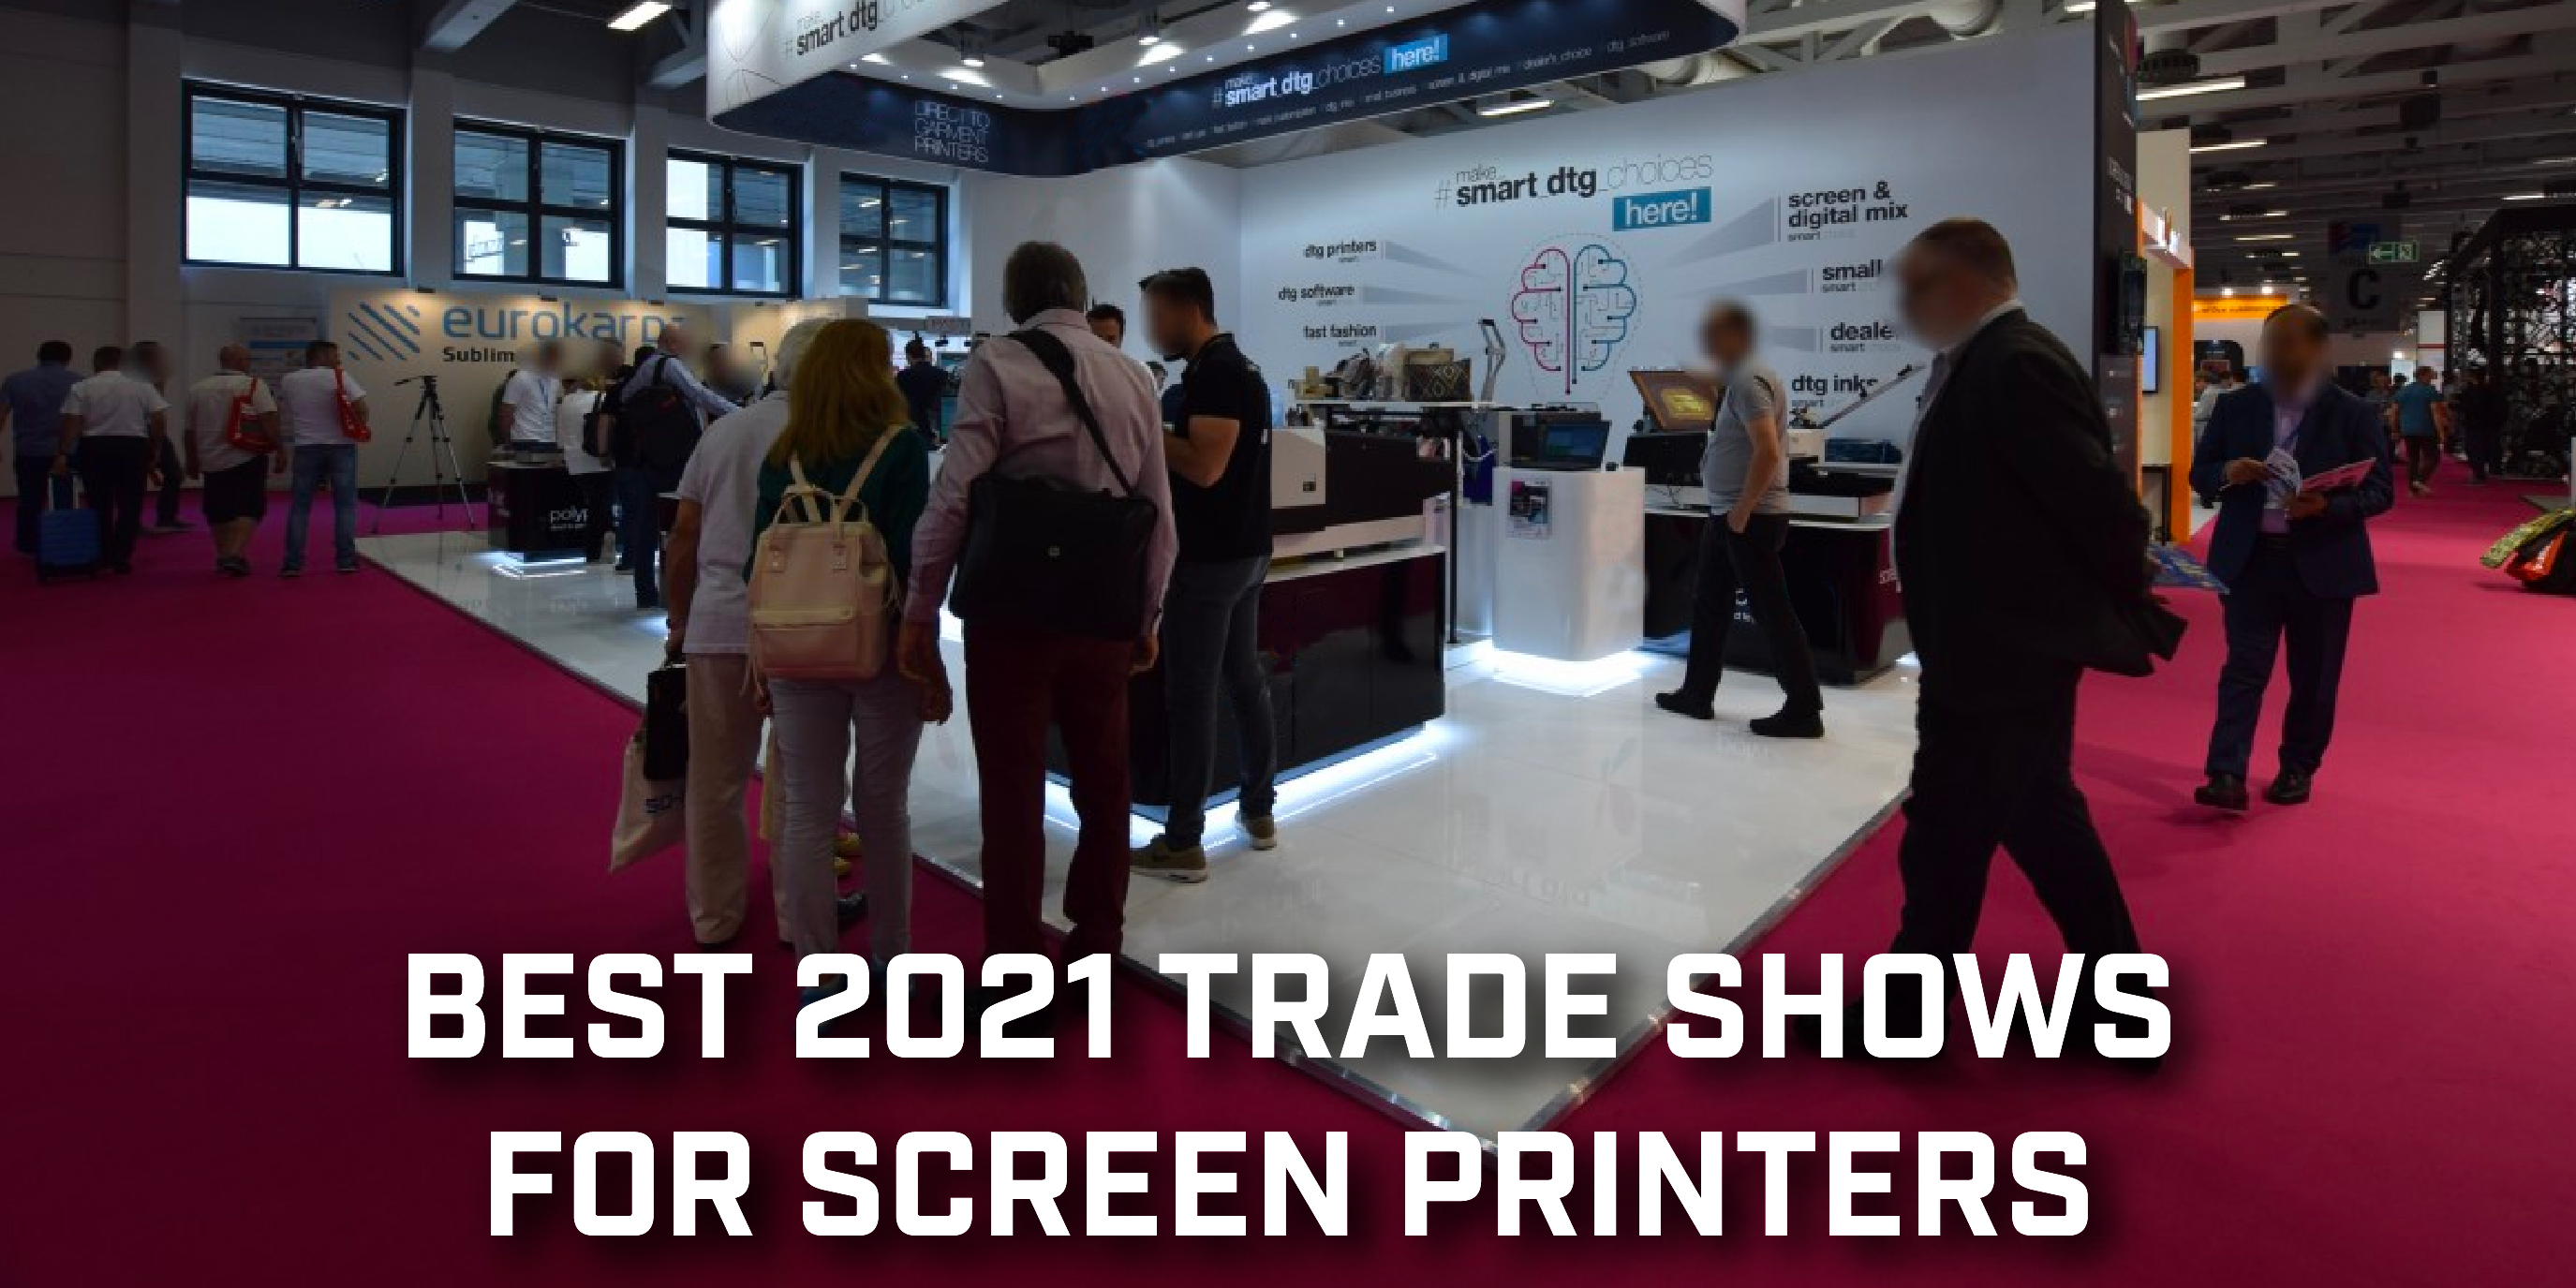 Best 2021 Trade Shows for Screen Printers